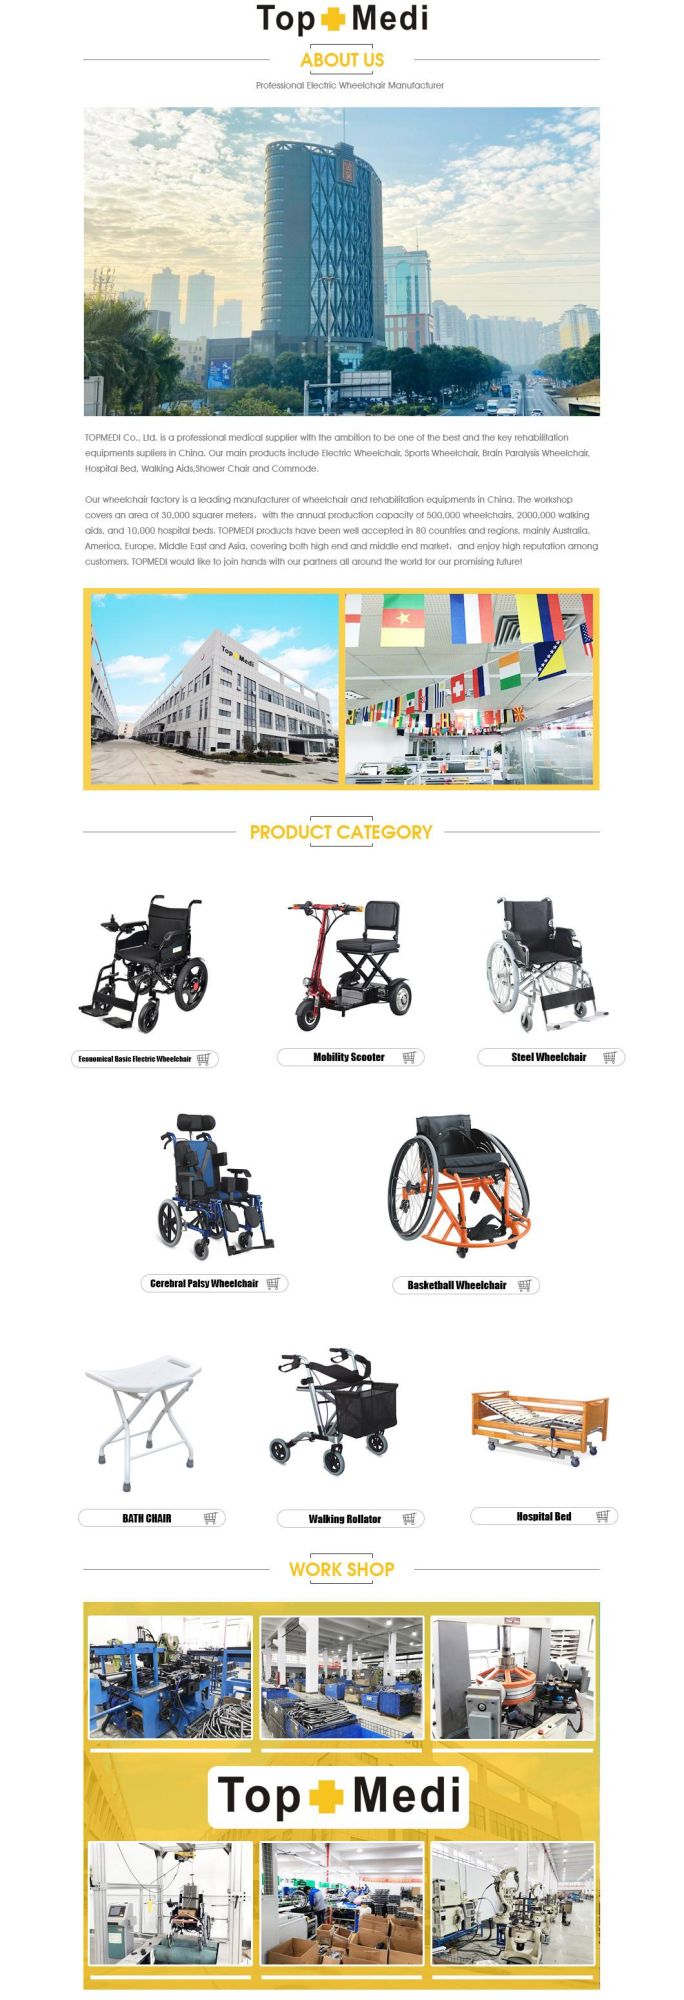 2022 Medical Equipment Light Weight Foldable Power Wheelchair for Disabled